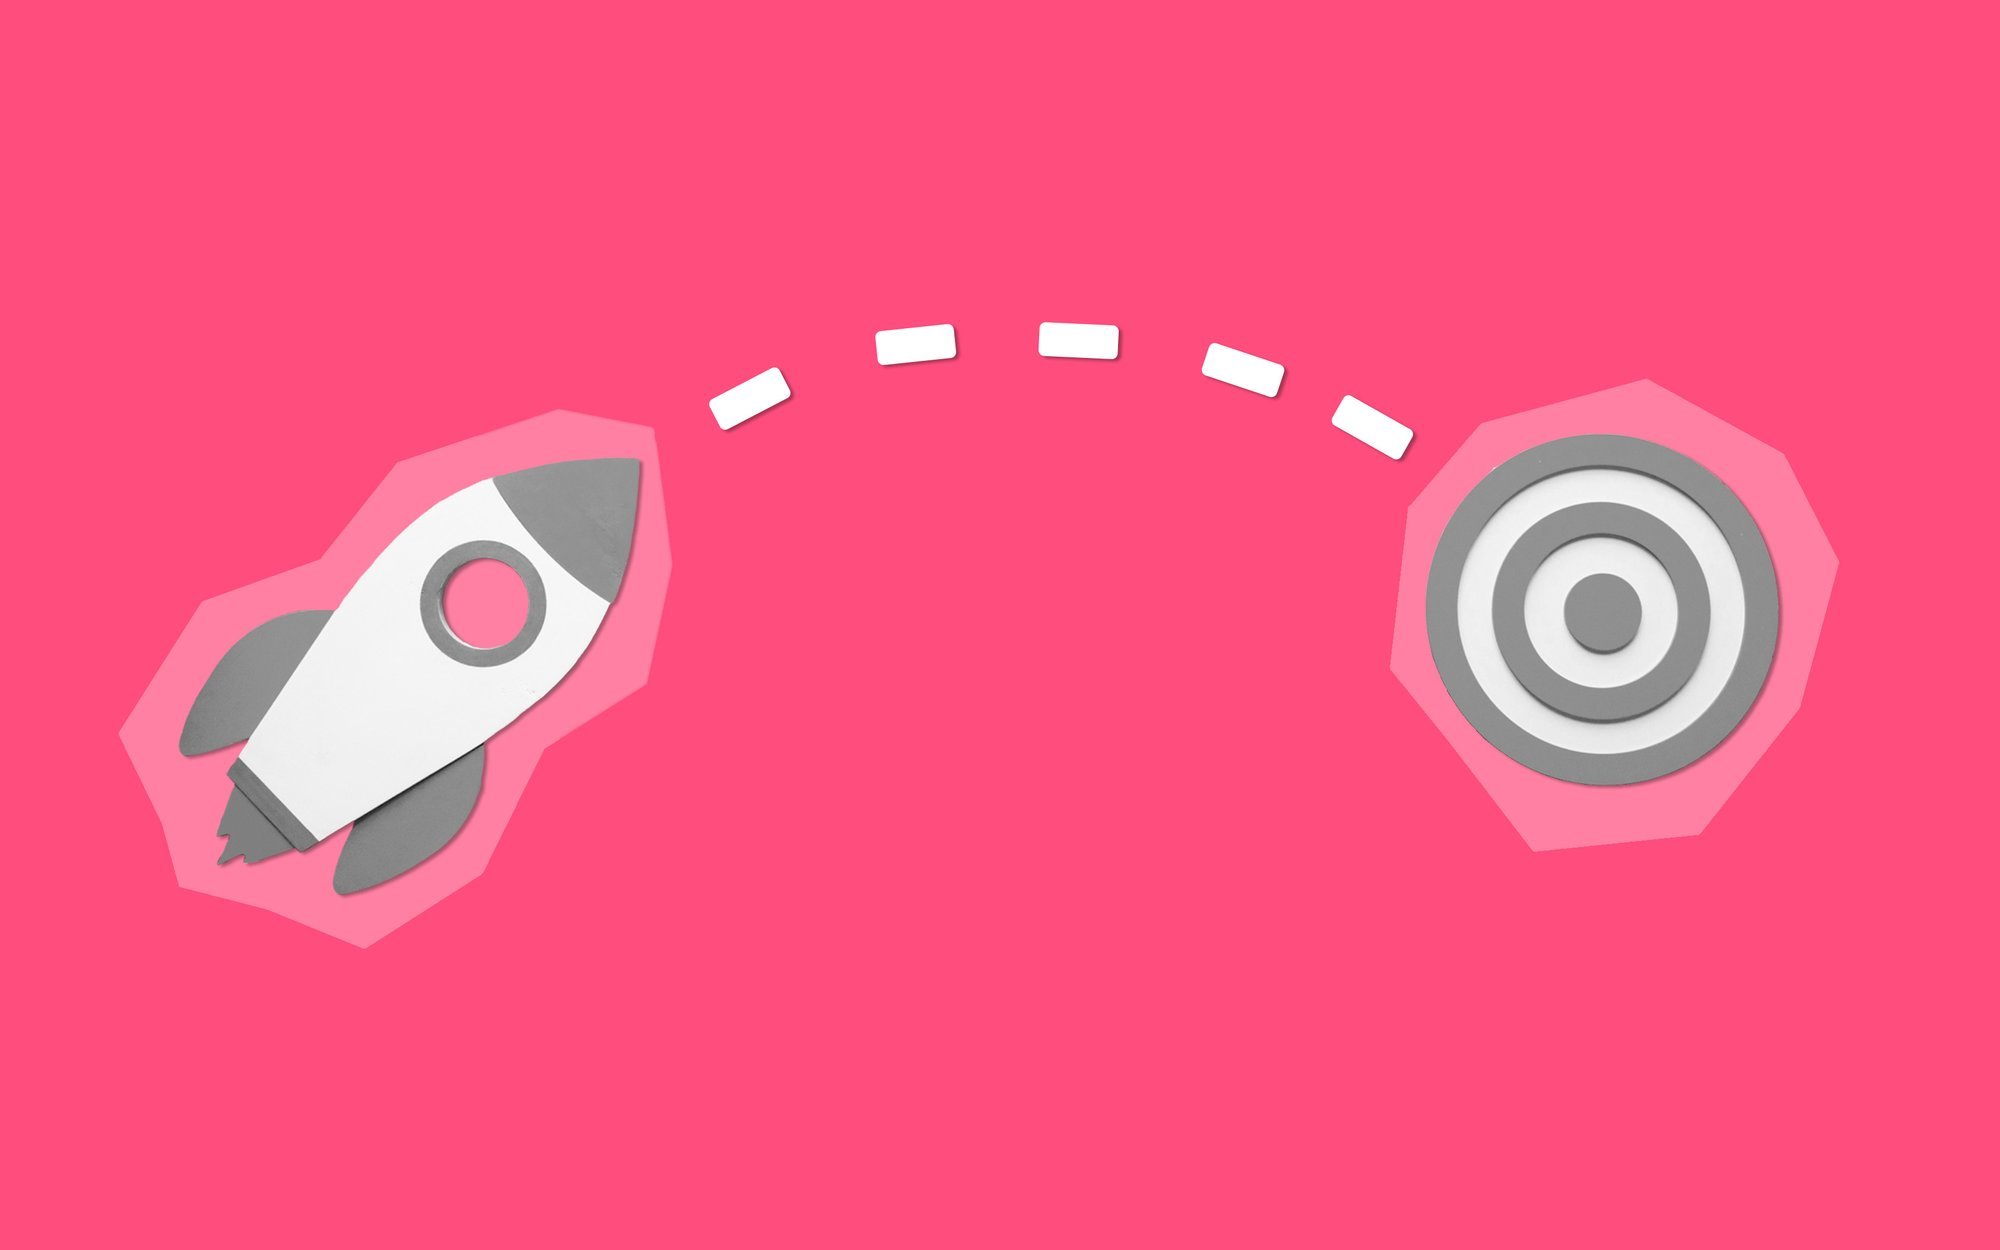 Cut-out images of a rocket on a path to a bullseye target on a bright pink background.